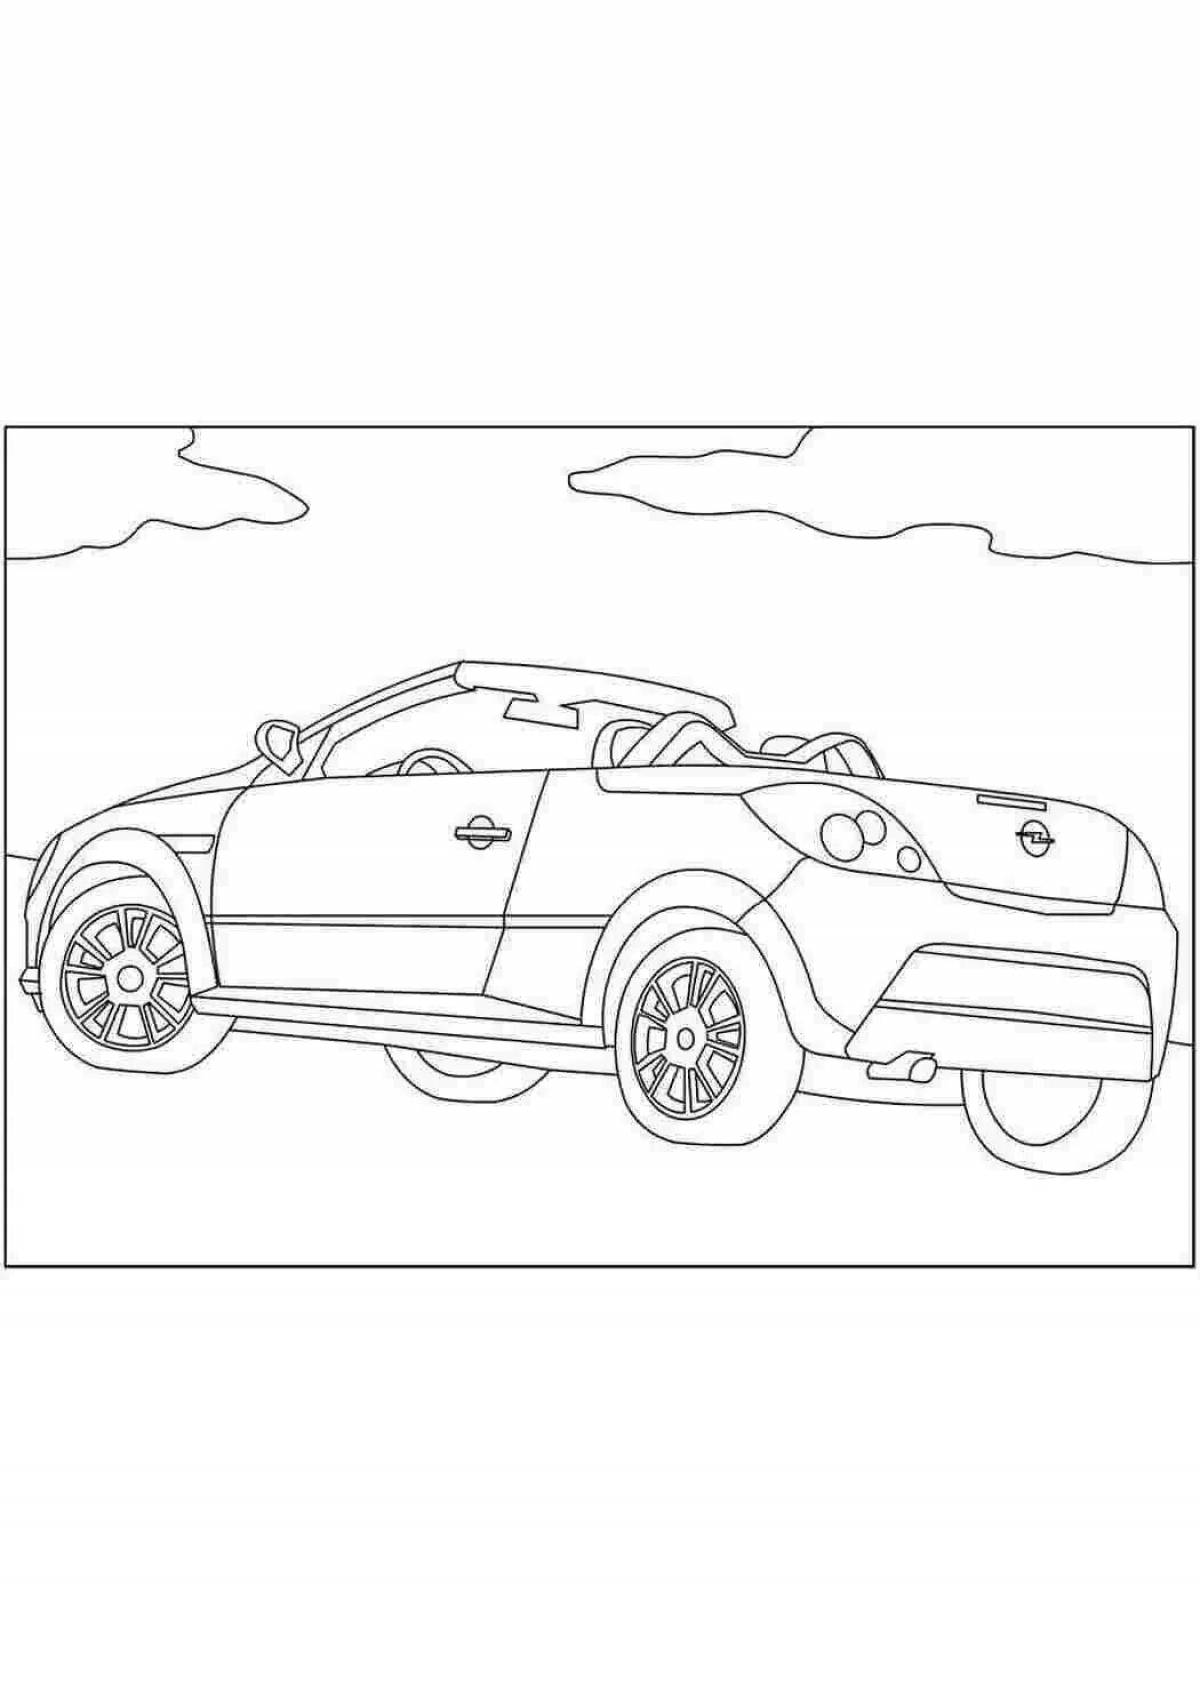 Coloring page adorable car for girls